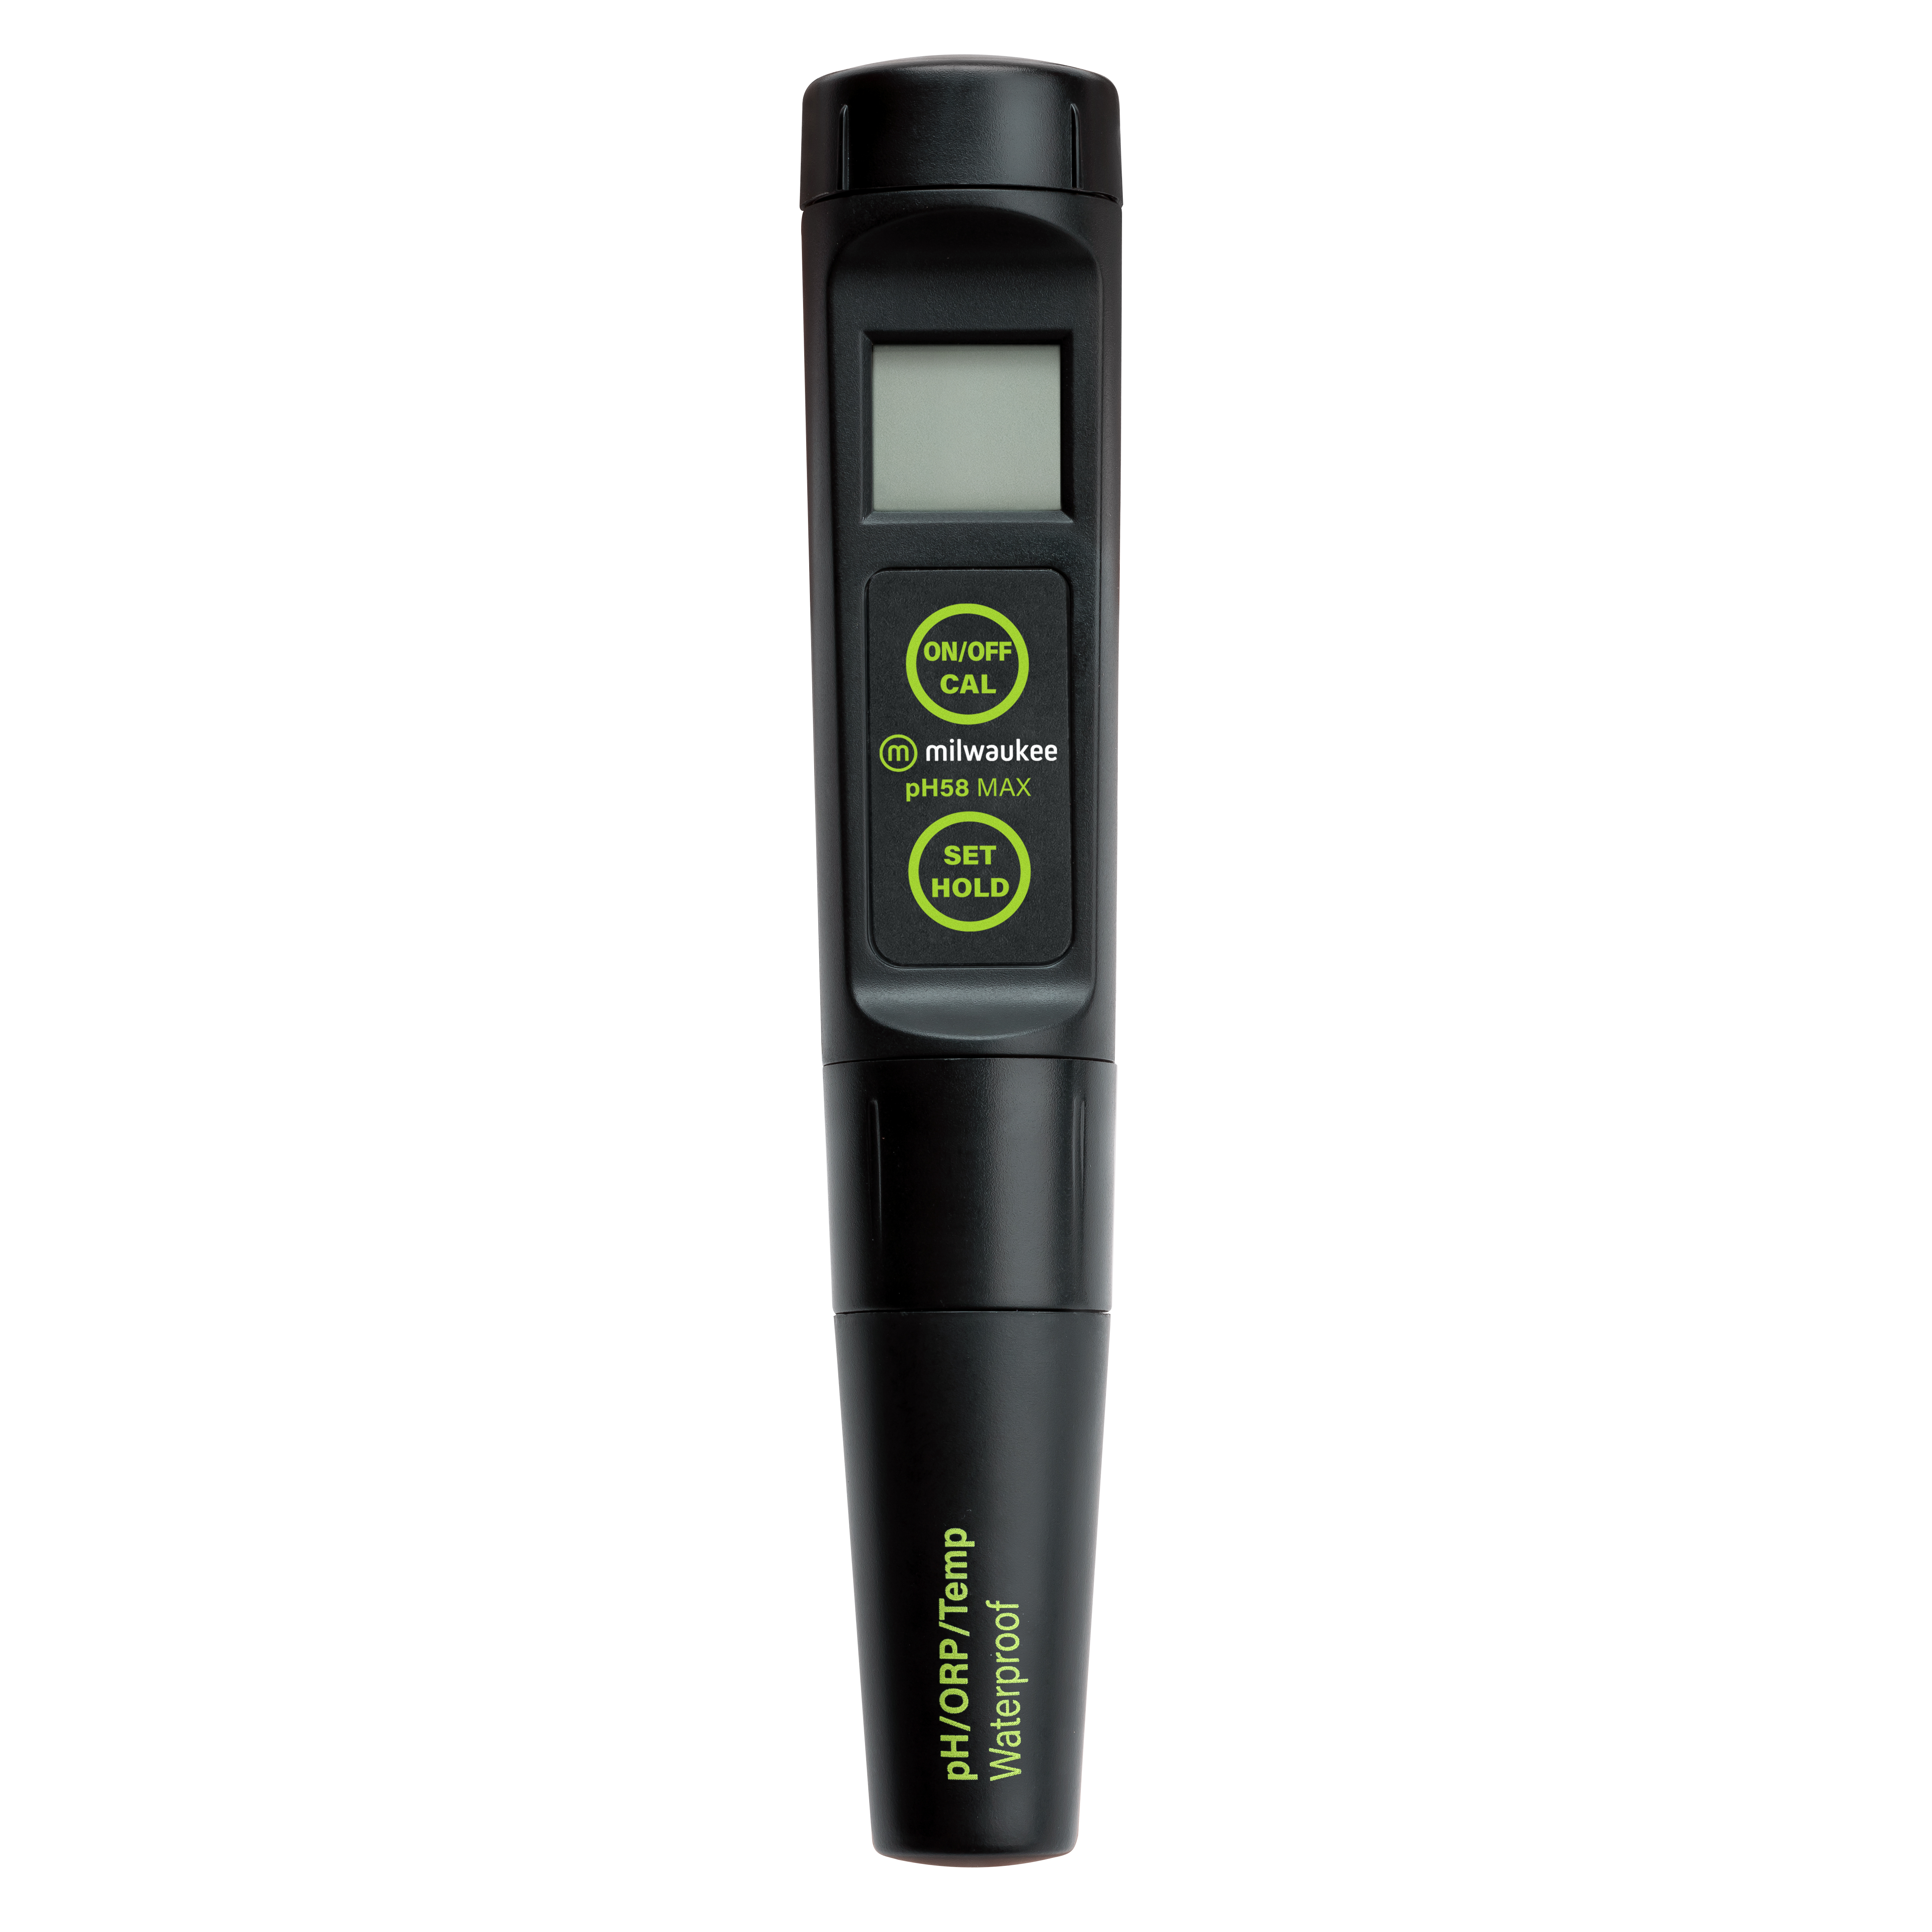 Milwaukee PH58 waterproof pH / ORP / Temperature Tester with automatic temperature compensation (ATC) and replaceable probe